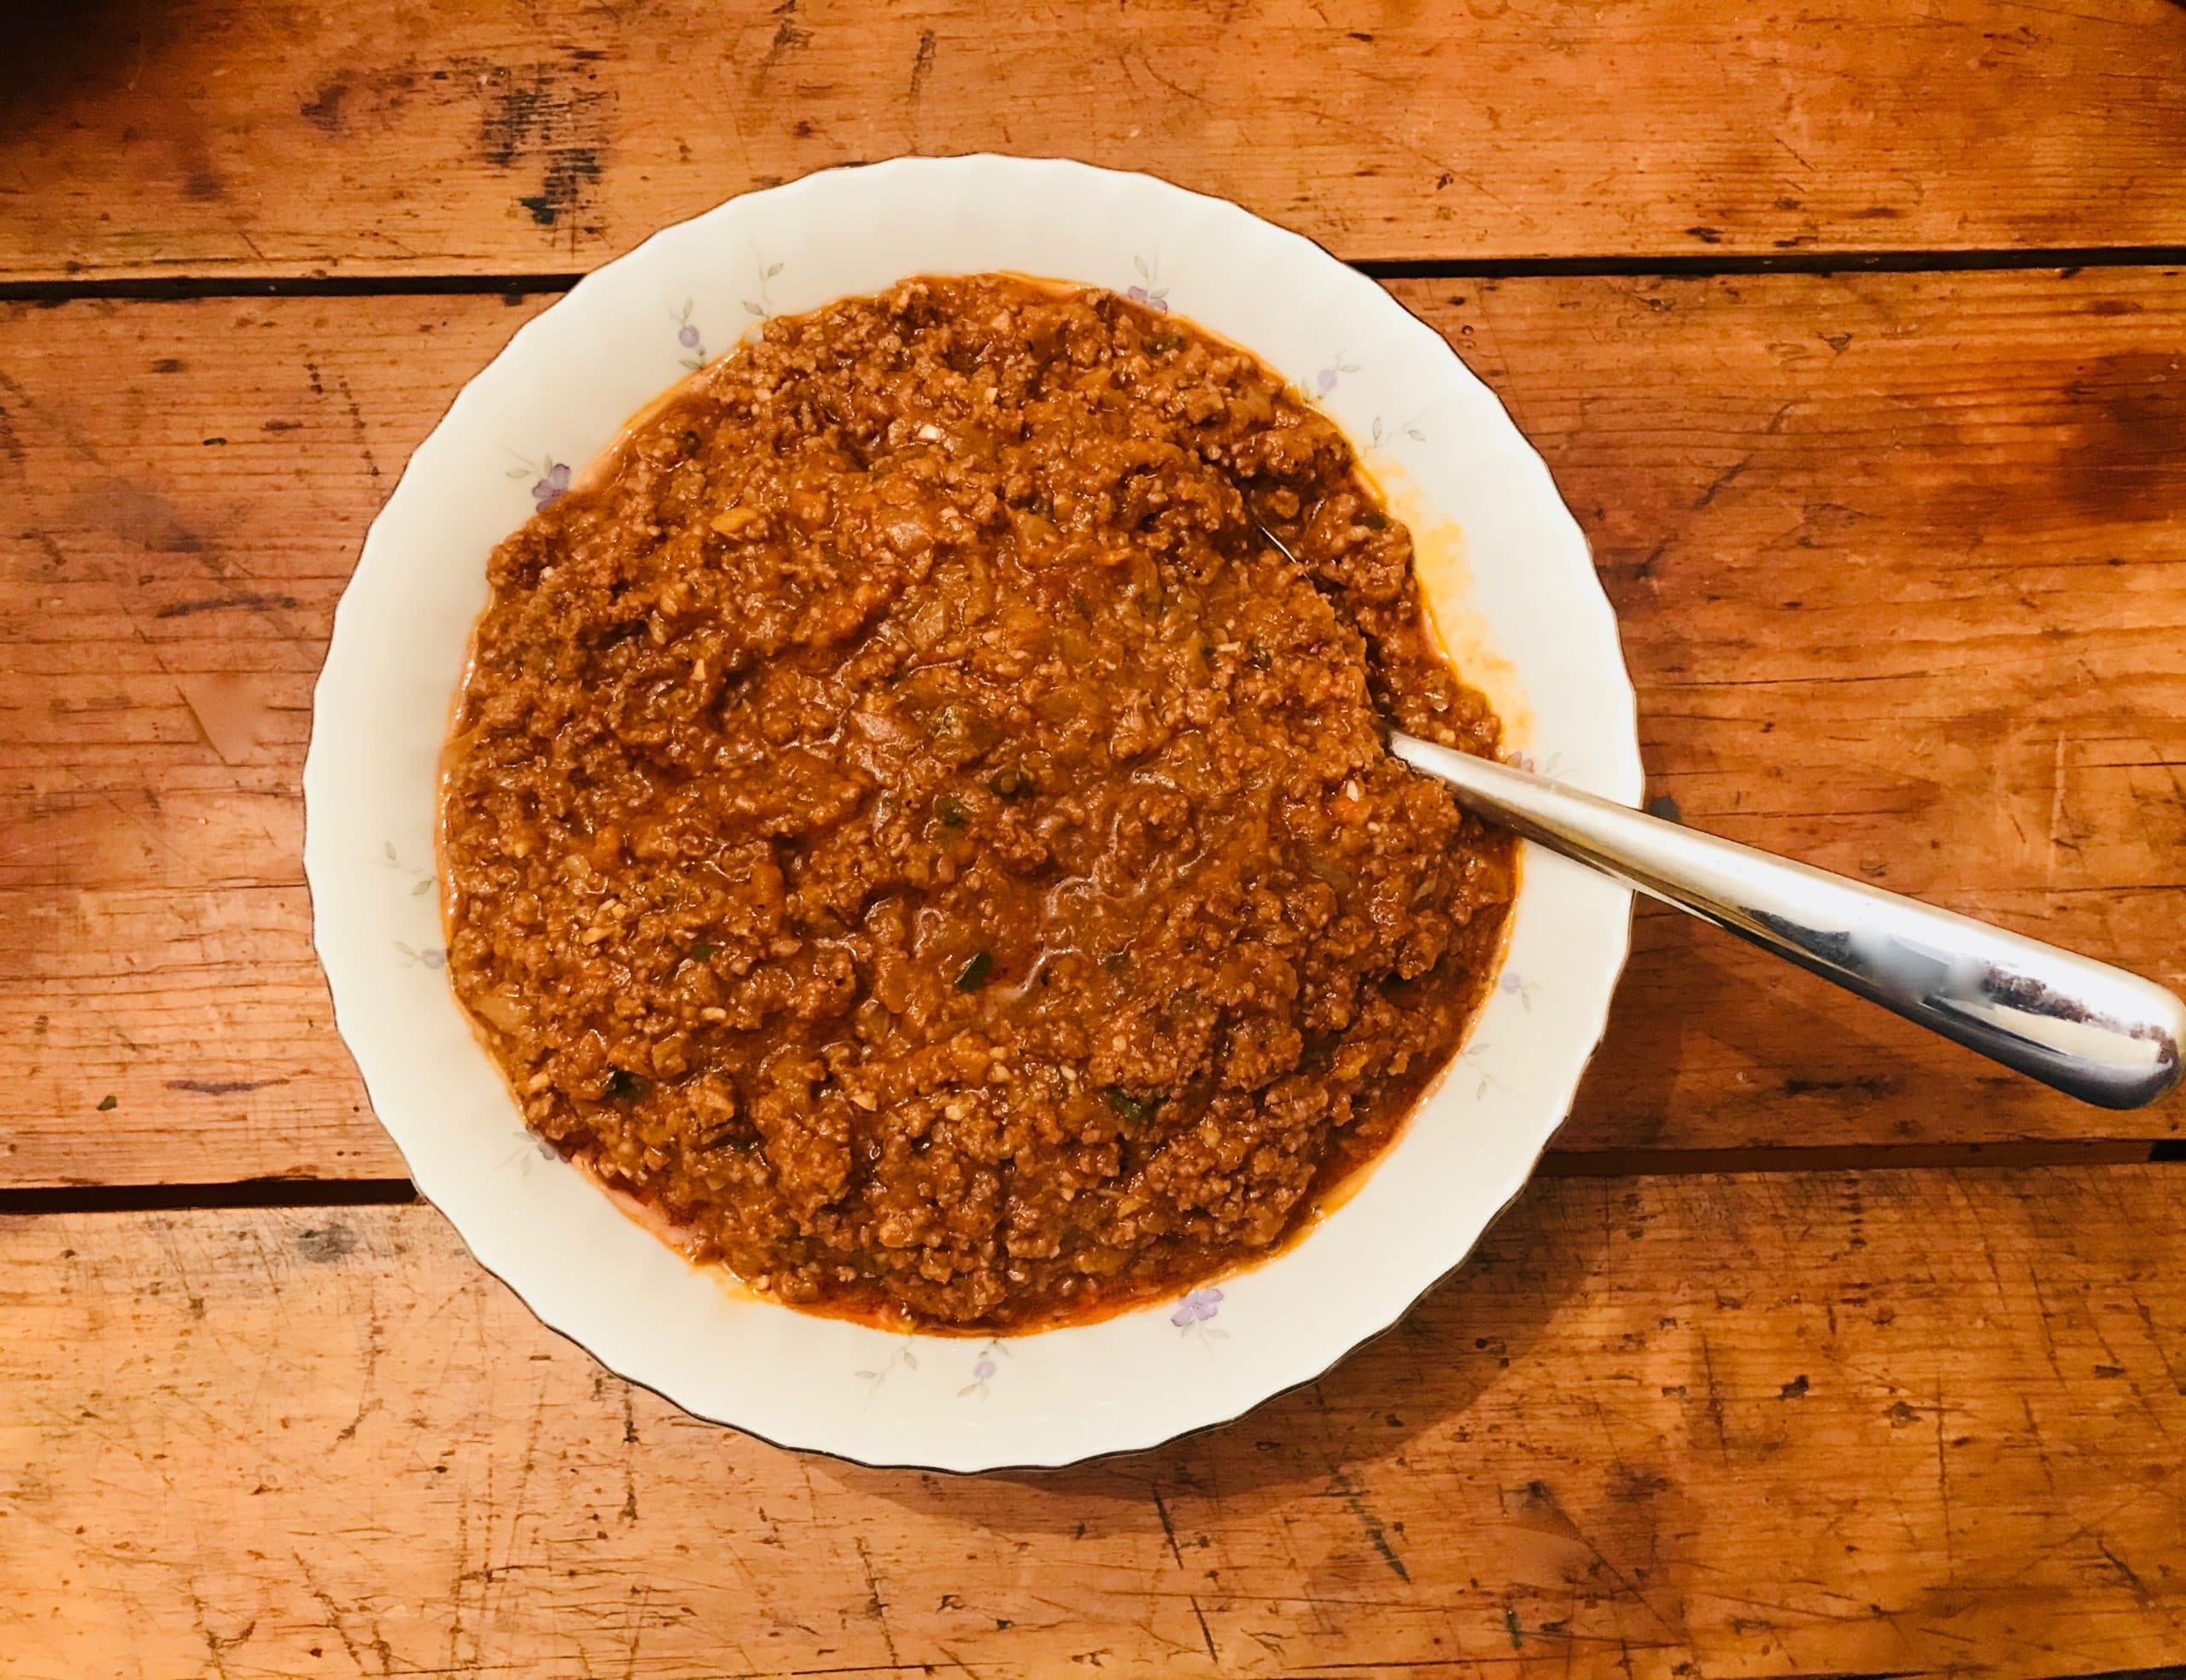 Sichuan-style chili